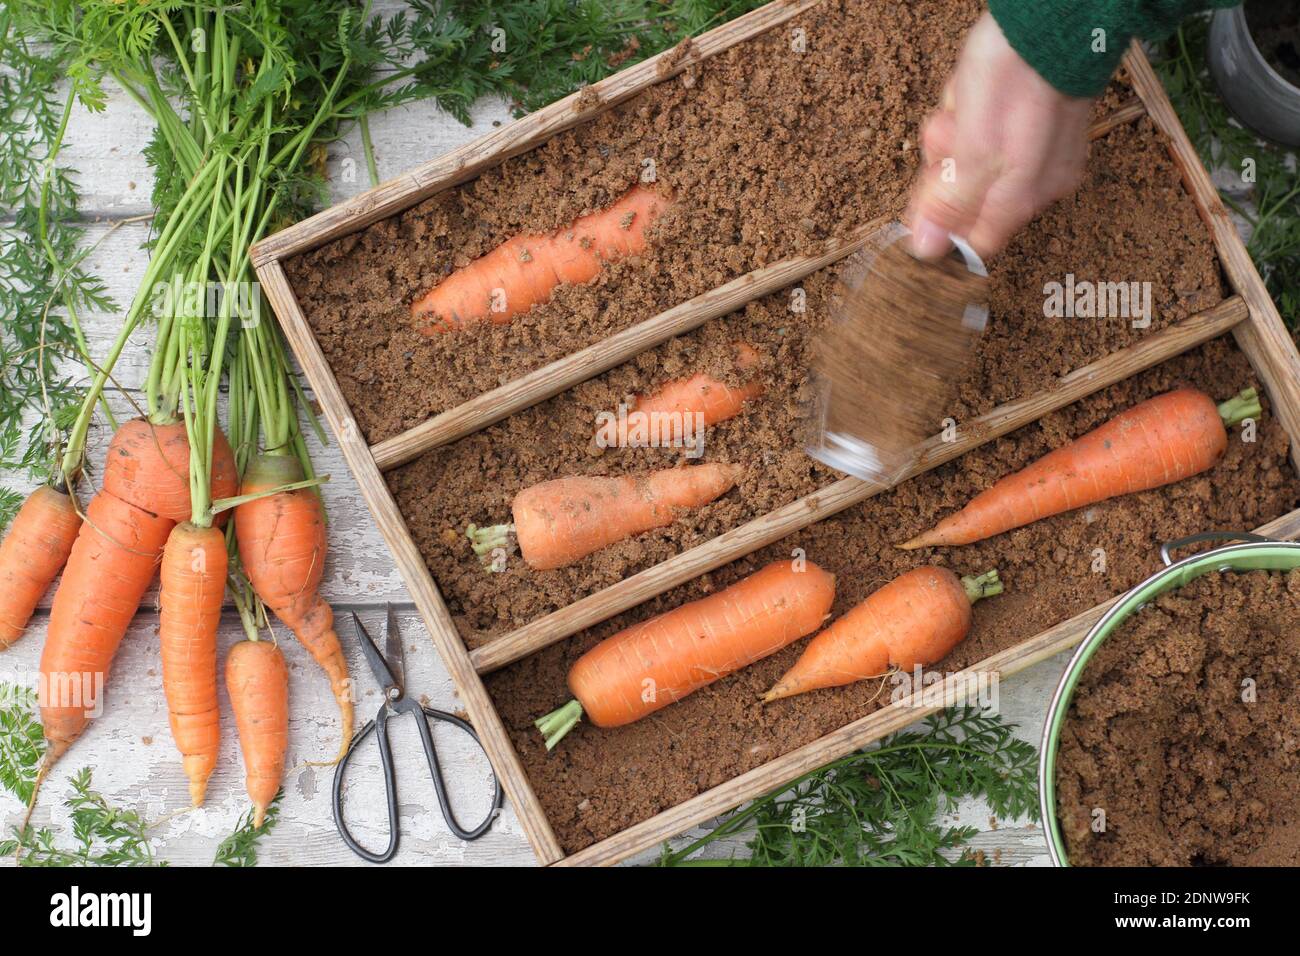 Daucus carota 'Autumn King'. Storing freshly harvested homegrown carrots in moist horticultural sand in a wooden crate. UK Stock Photo